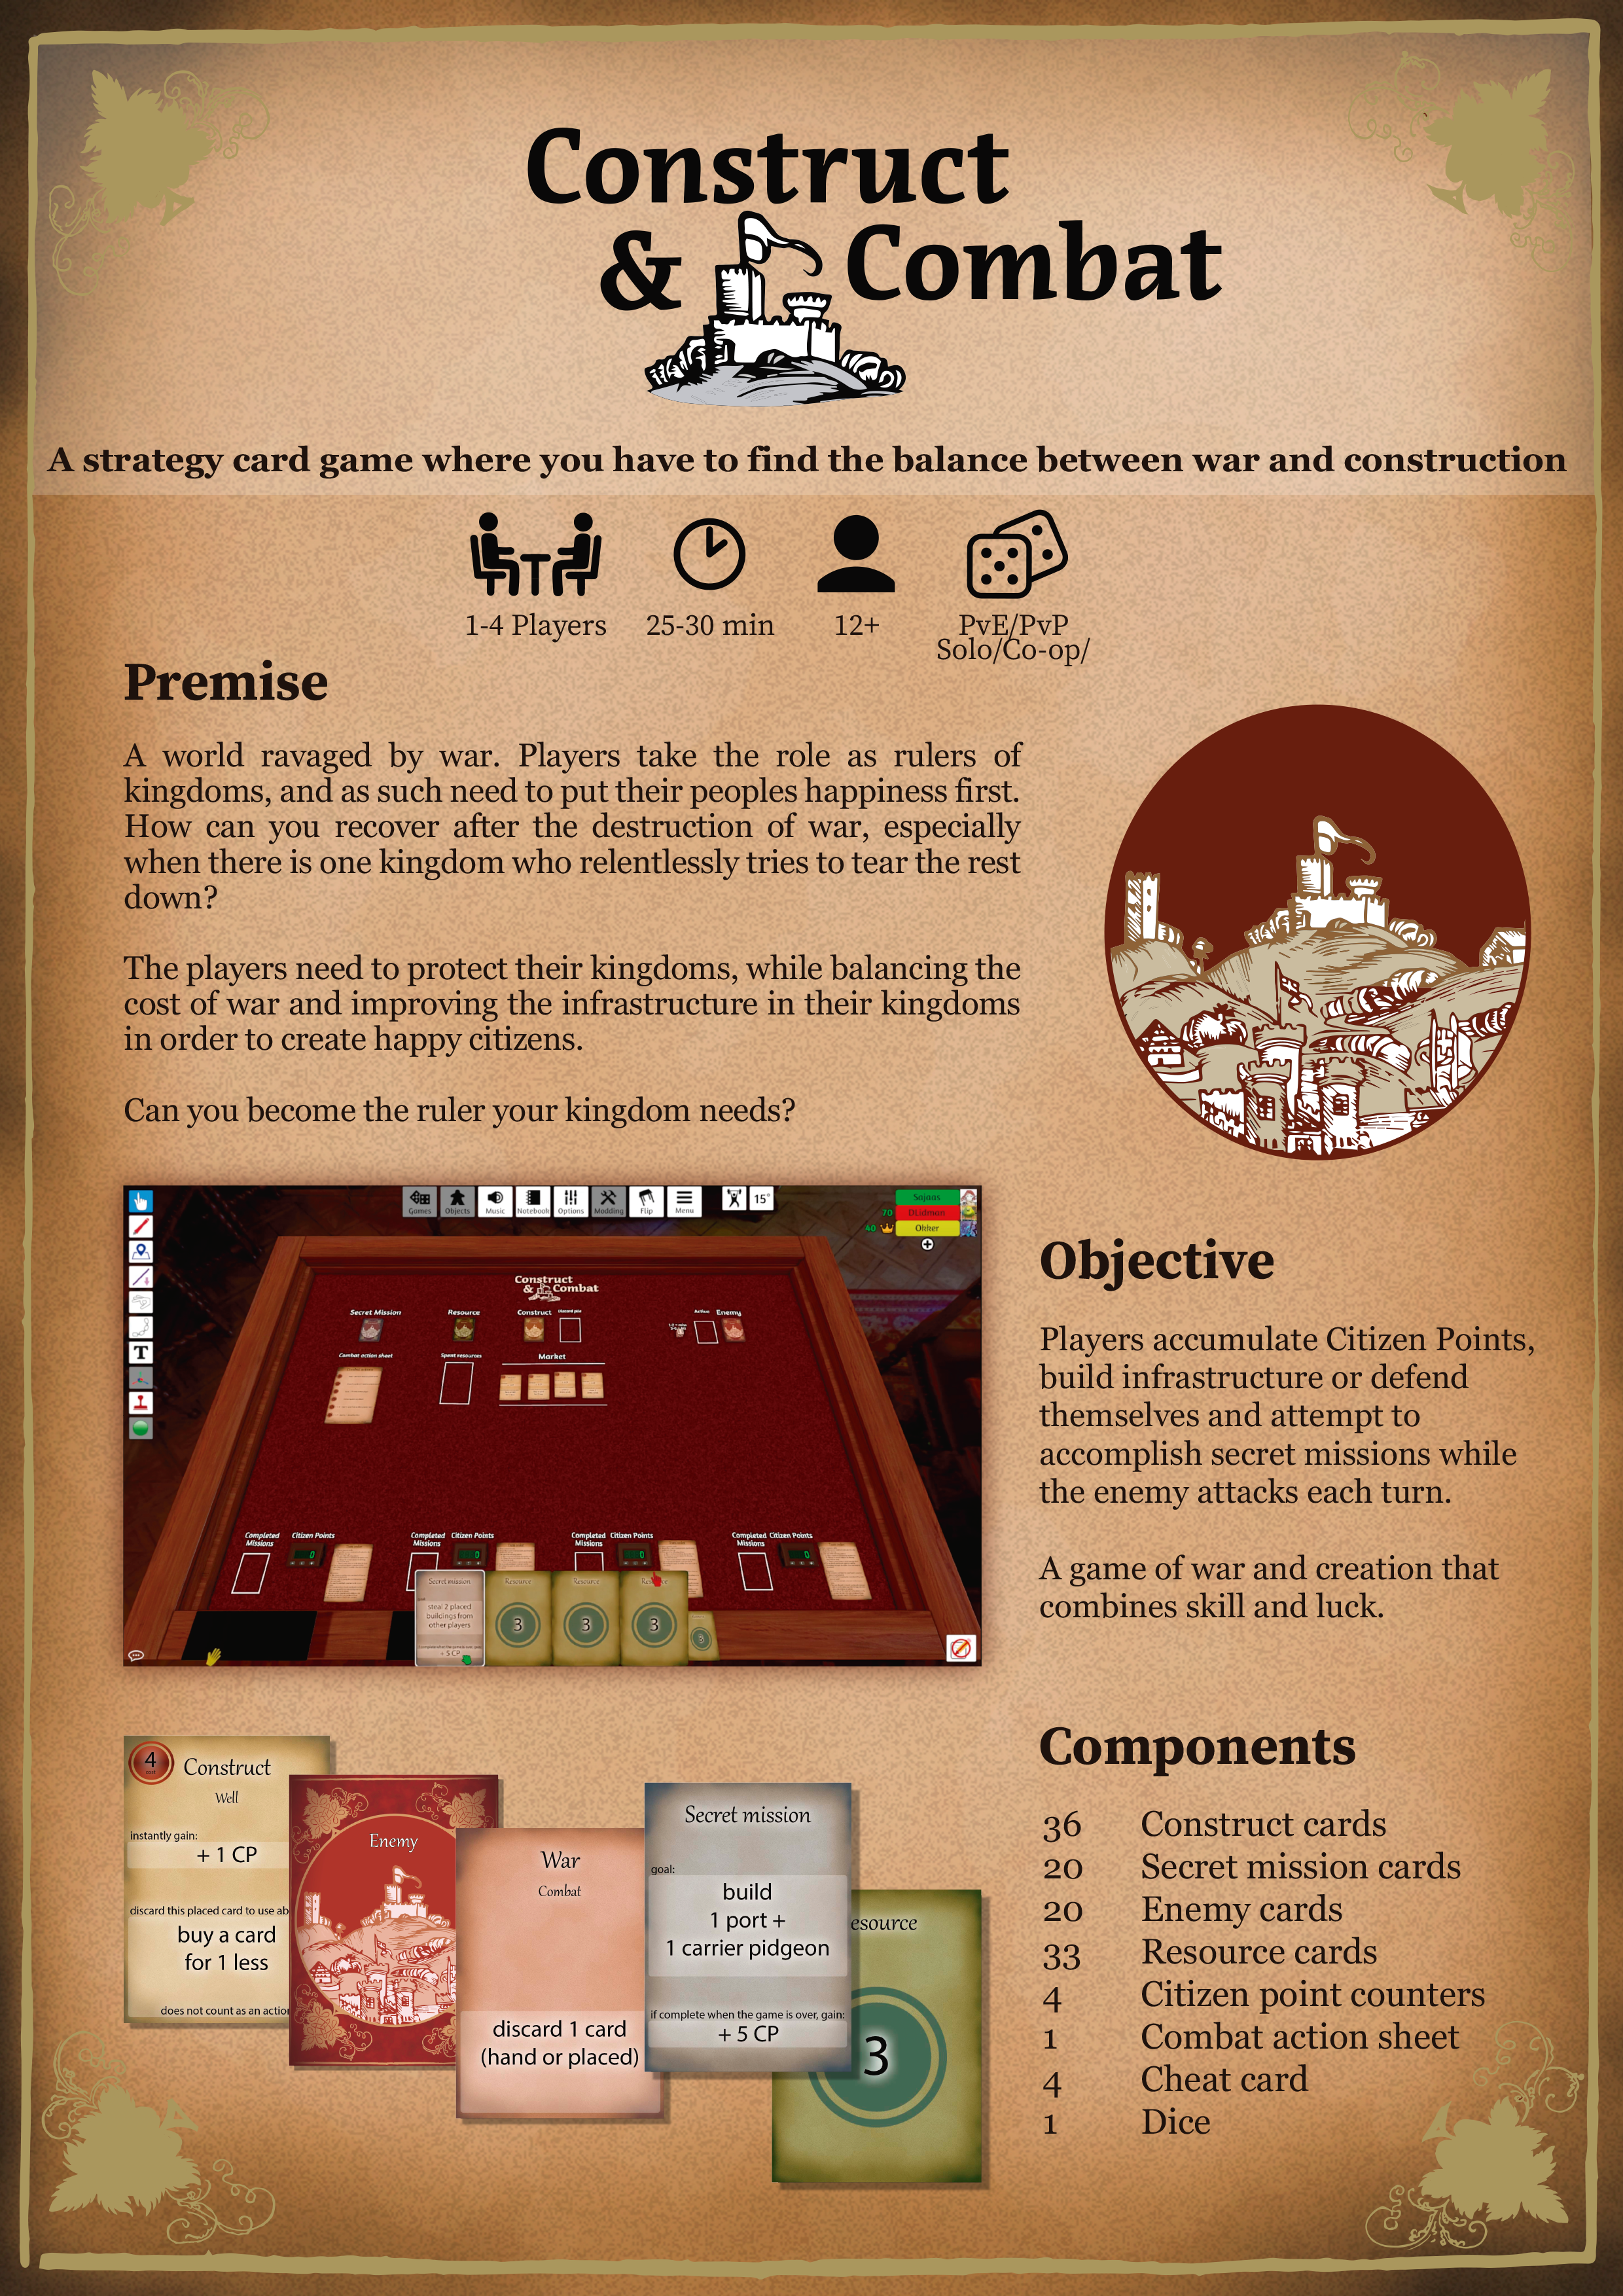 A sell sheet for the game, with premise, objective, and components